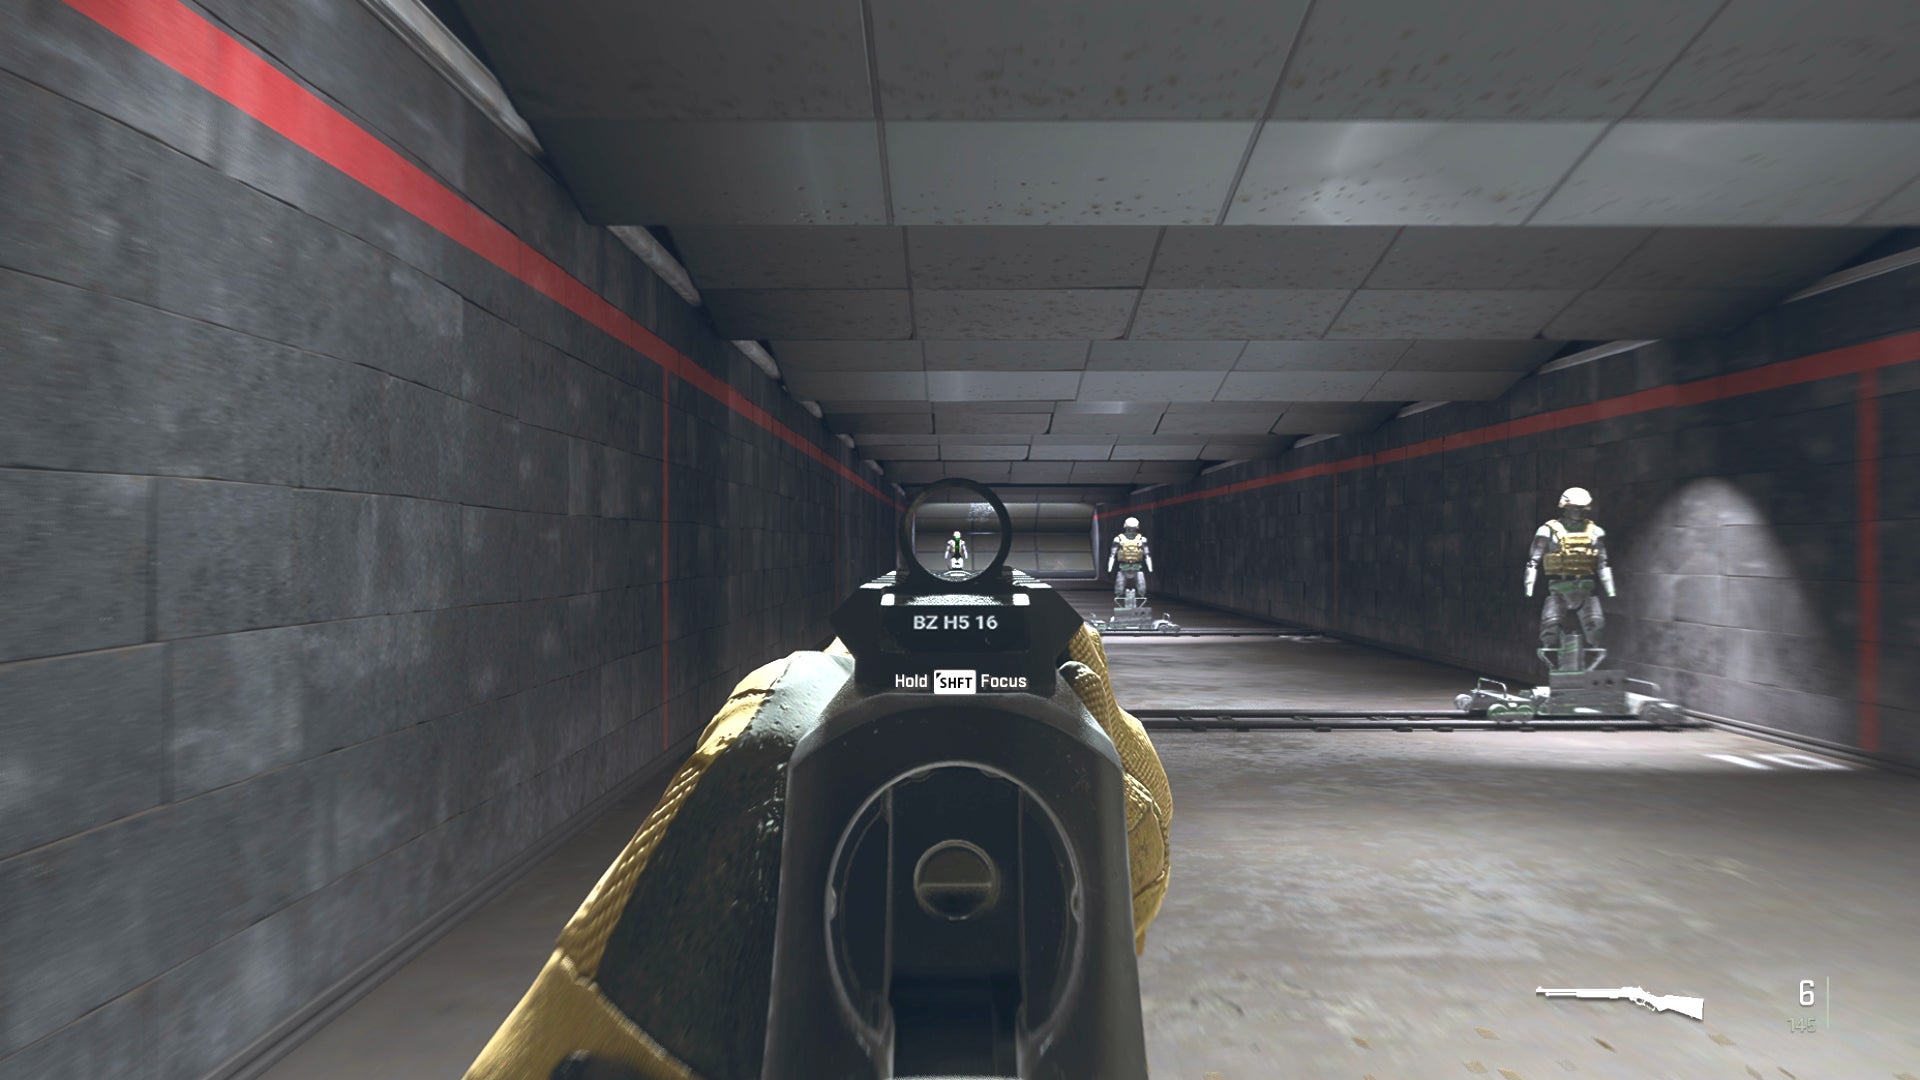 The player in Warzone 2.0 aims at a training dummy with the Lockwood Mk2 ironsights.